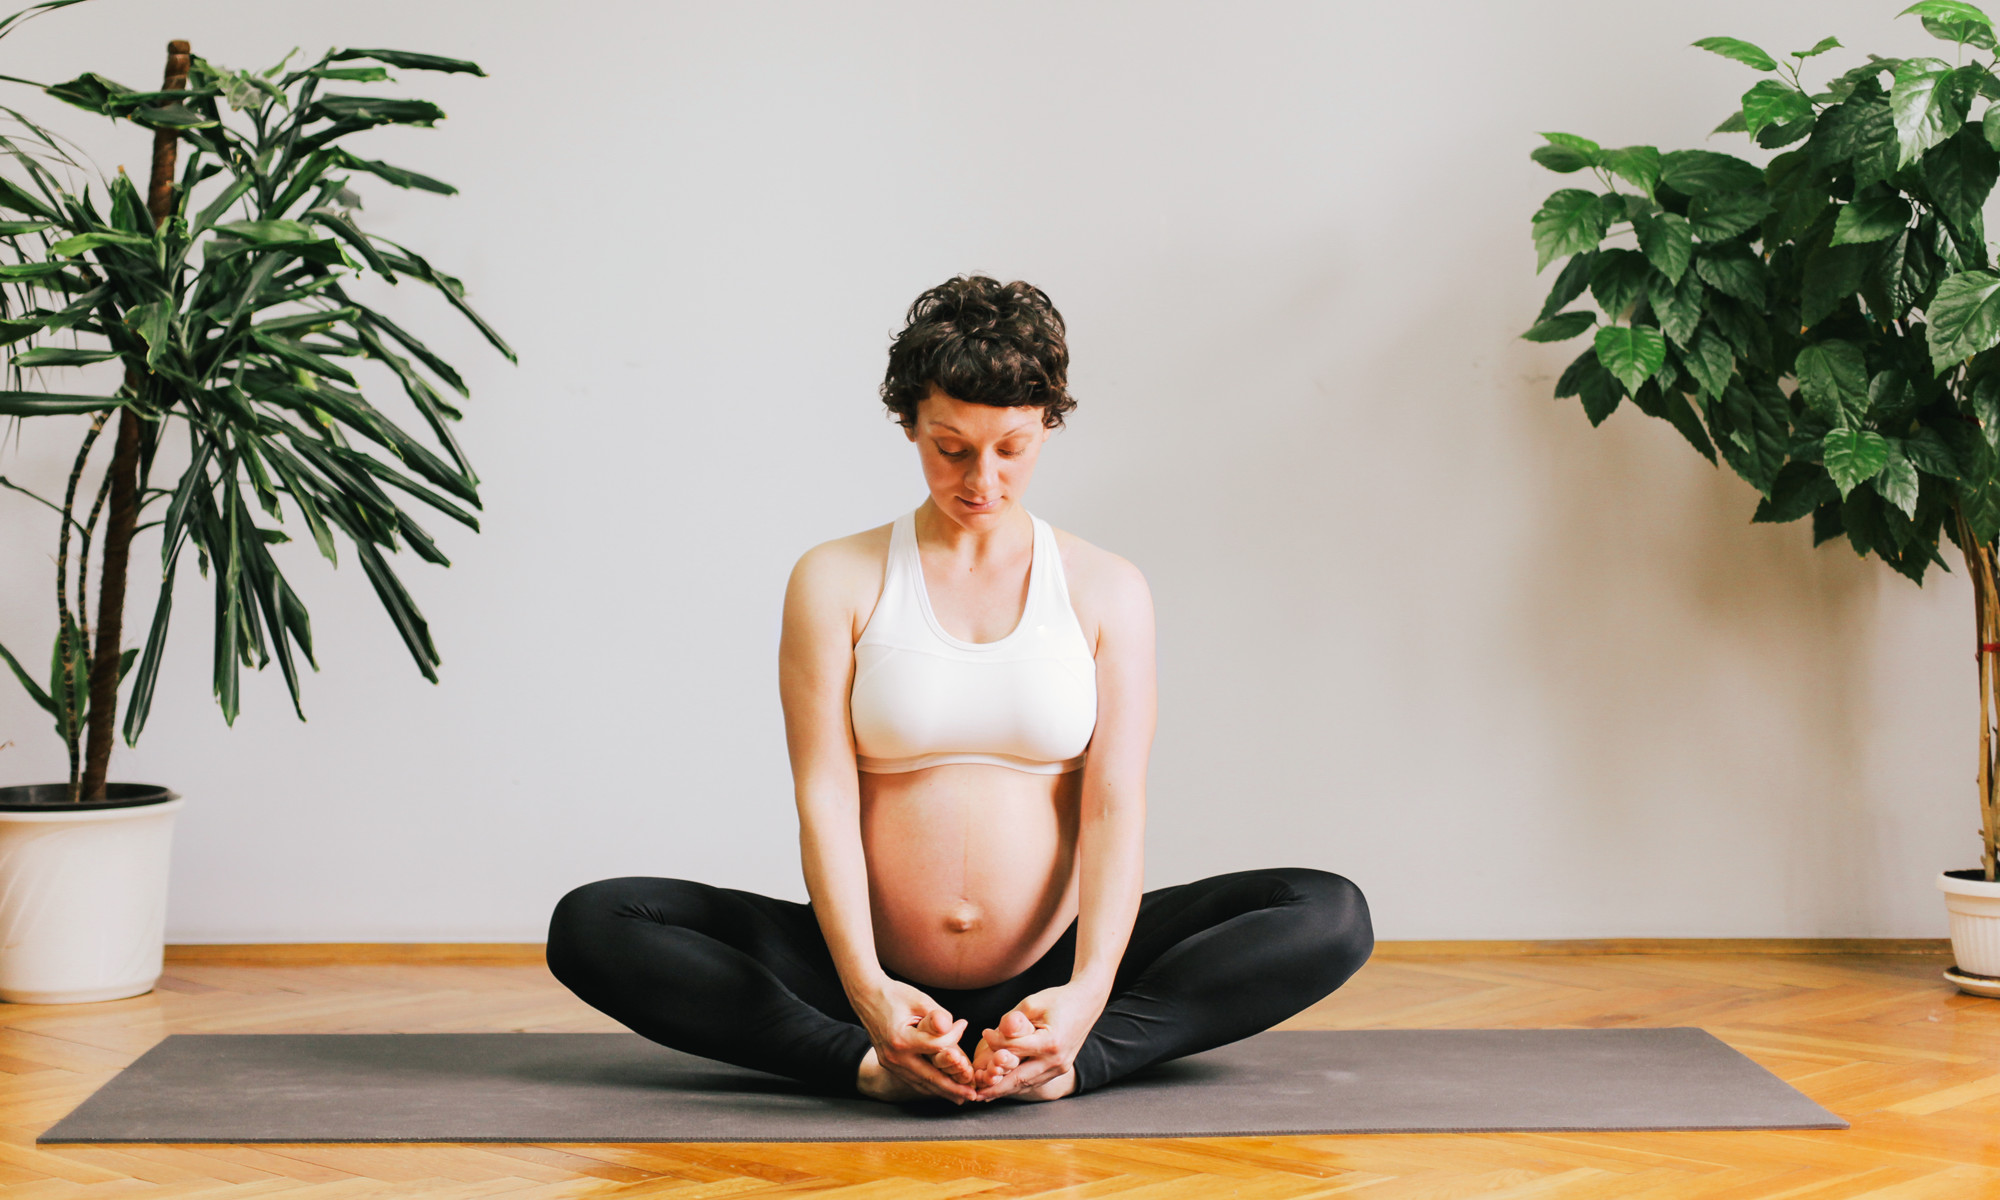 8 Pregnancy Exercises To Relieve Pain, For Every Trimester